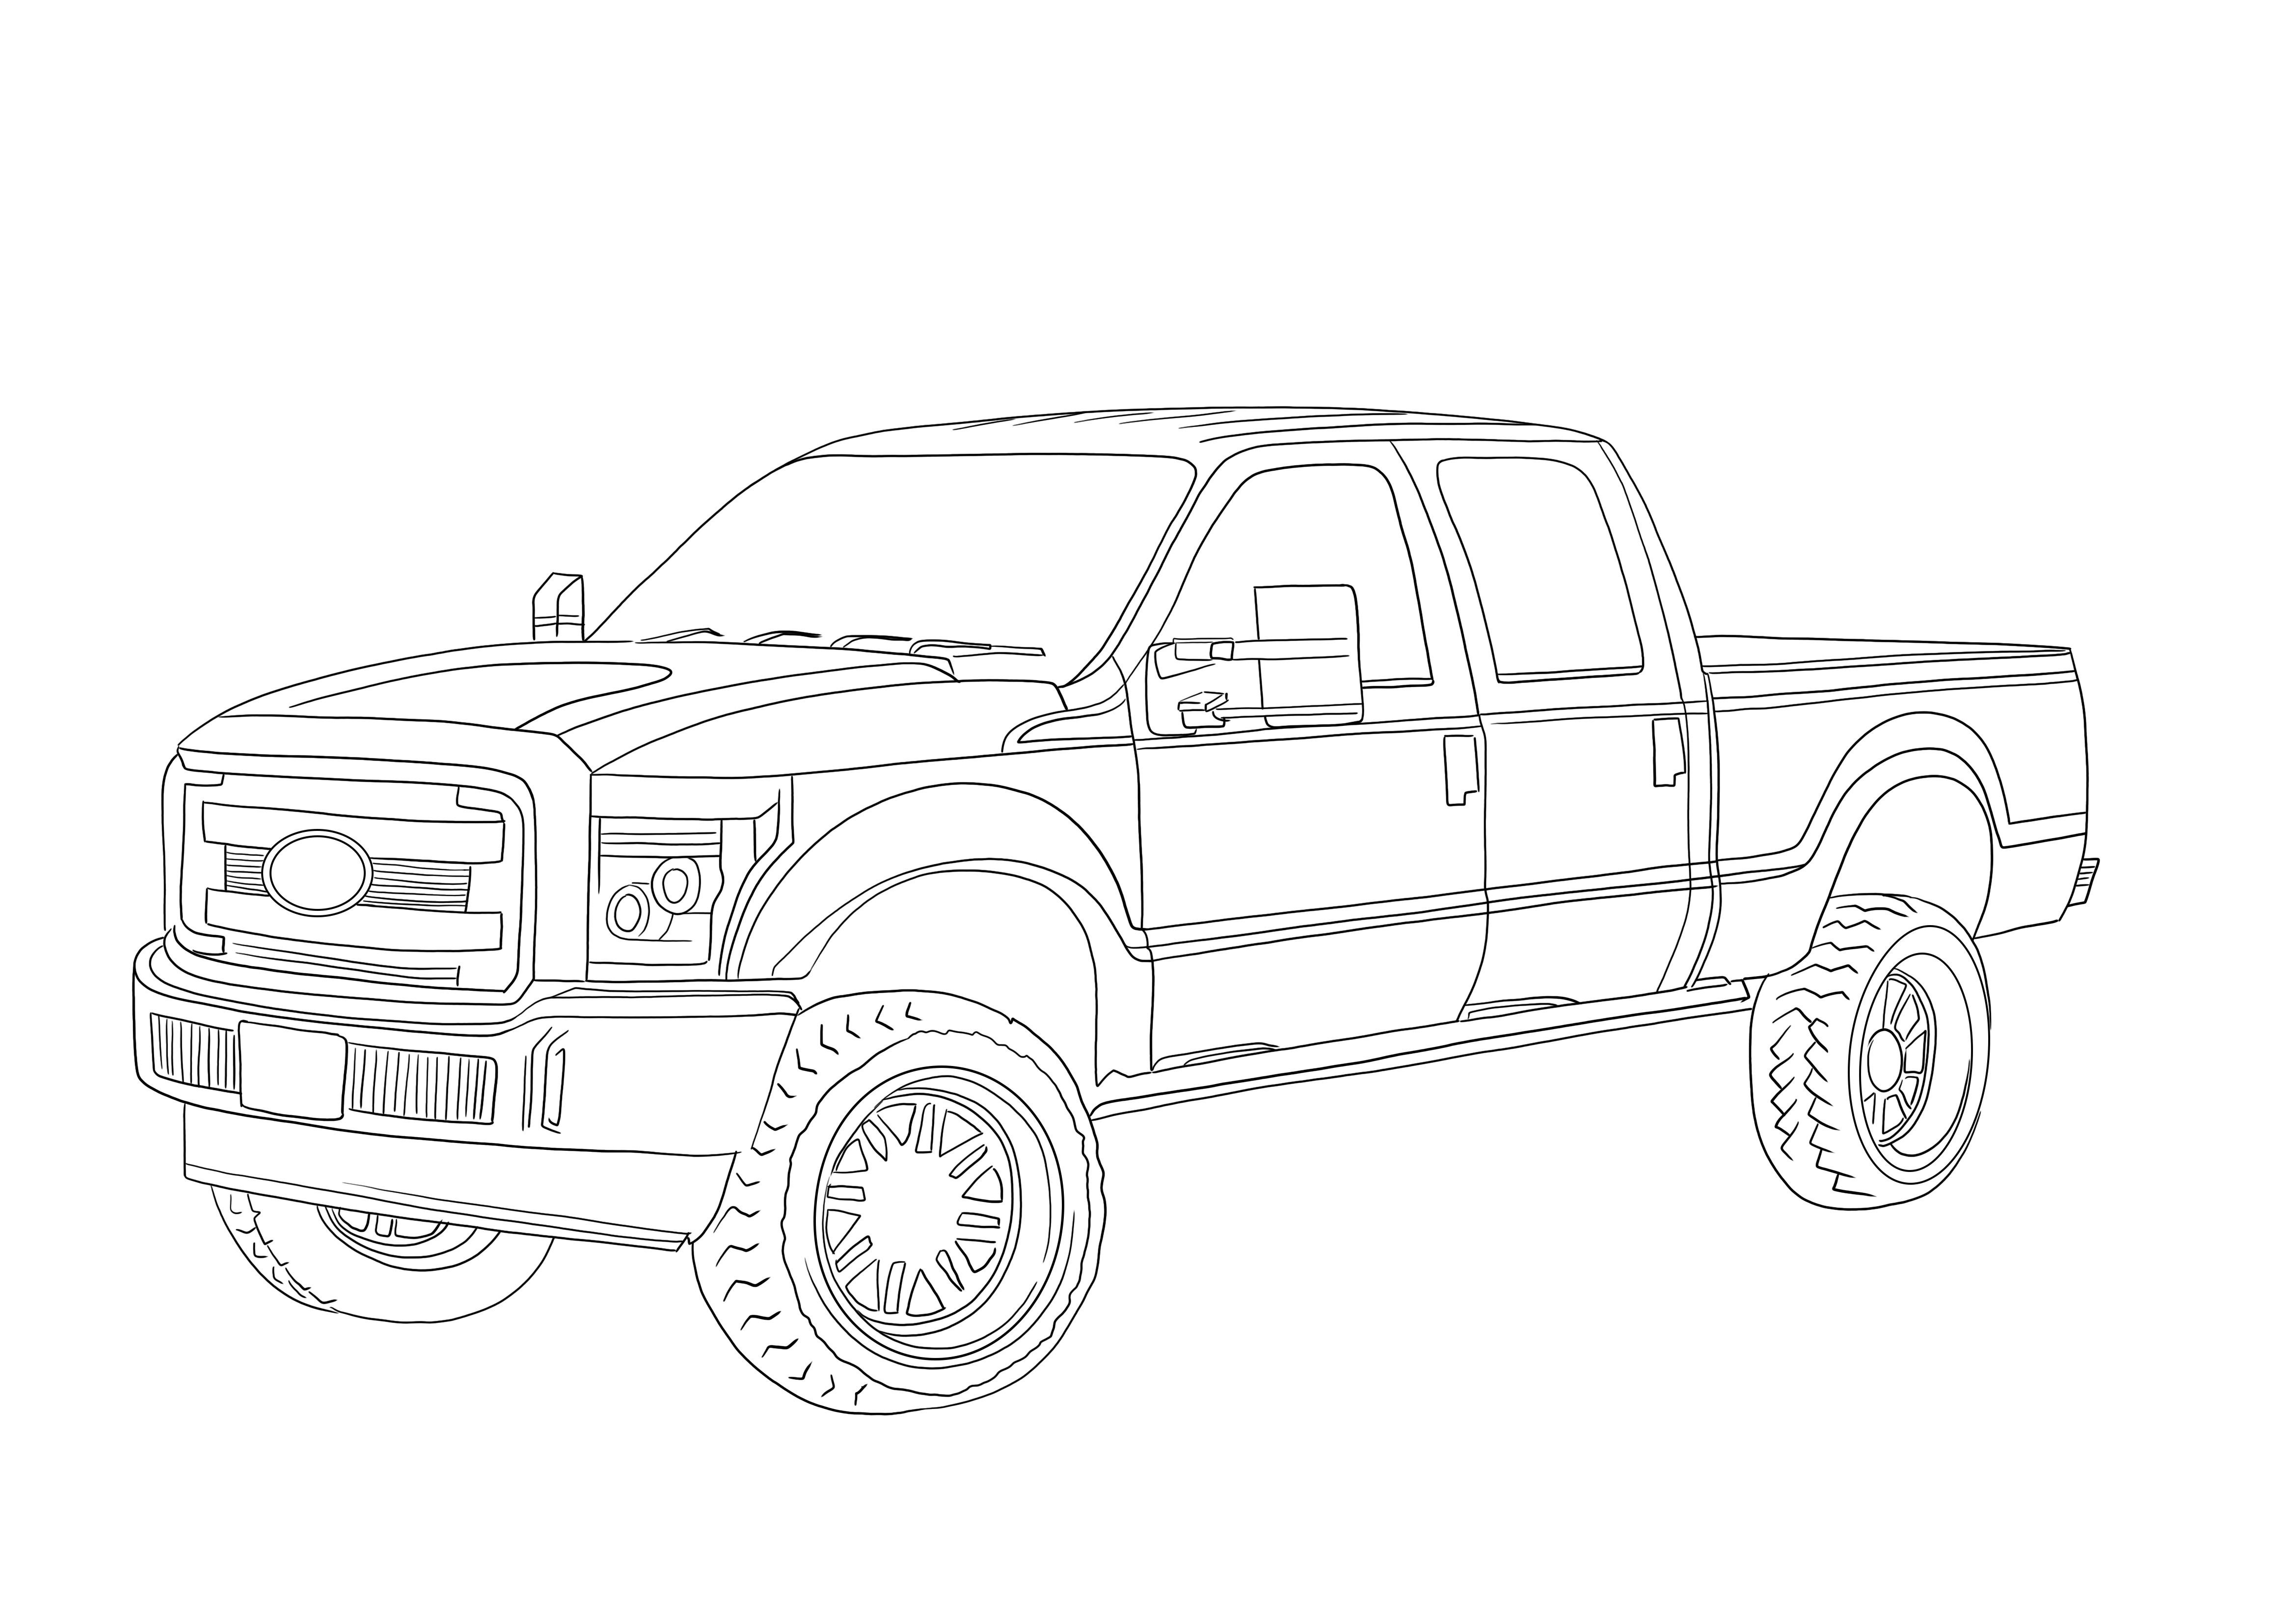 2014 Ford F250 Lifted coloring image for free printing or downloading